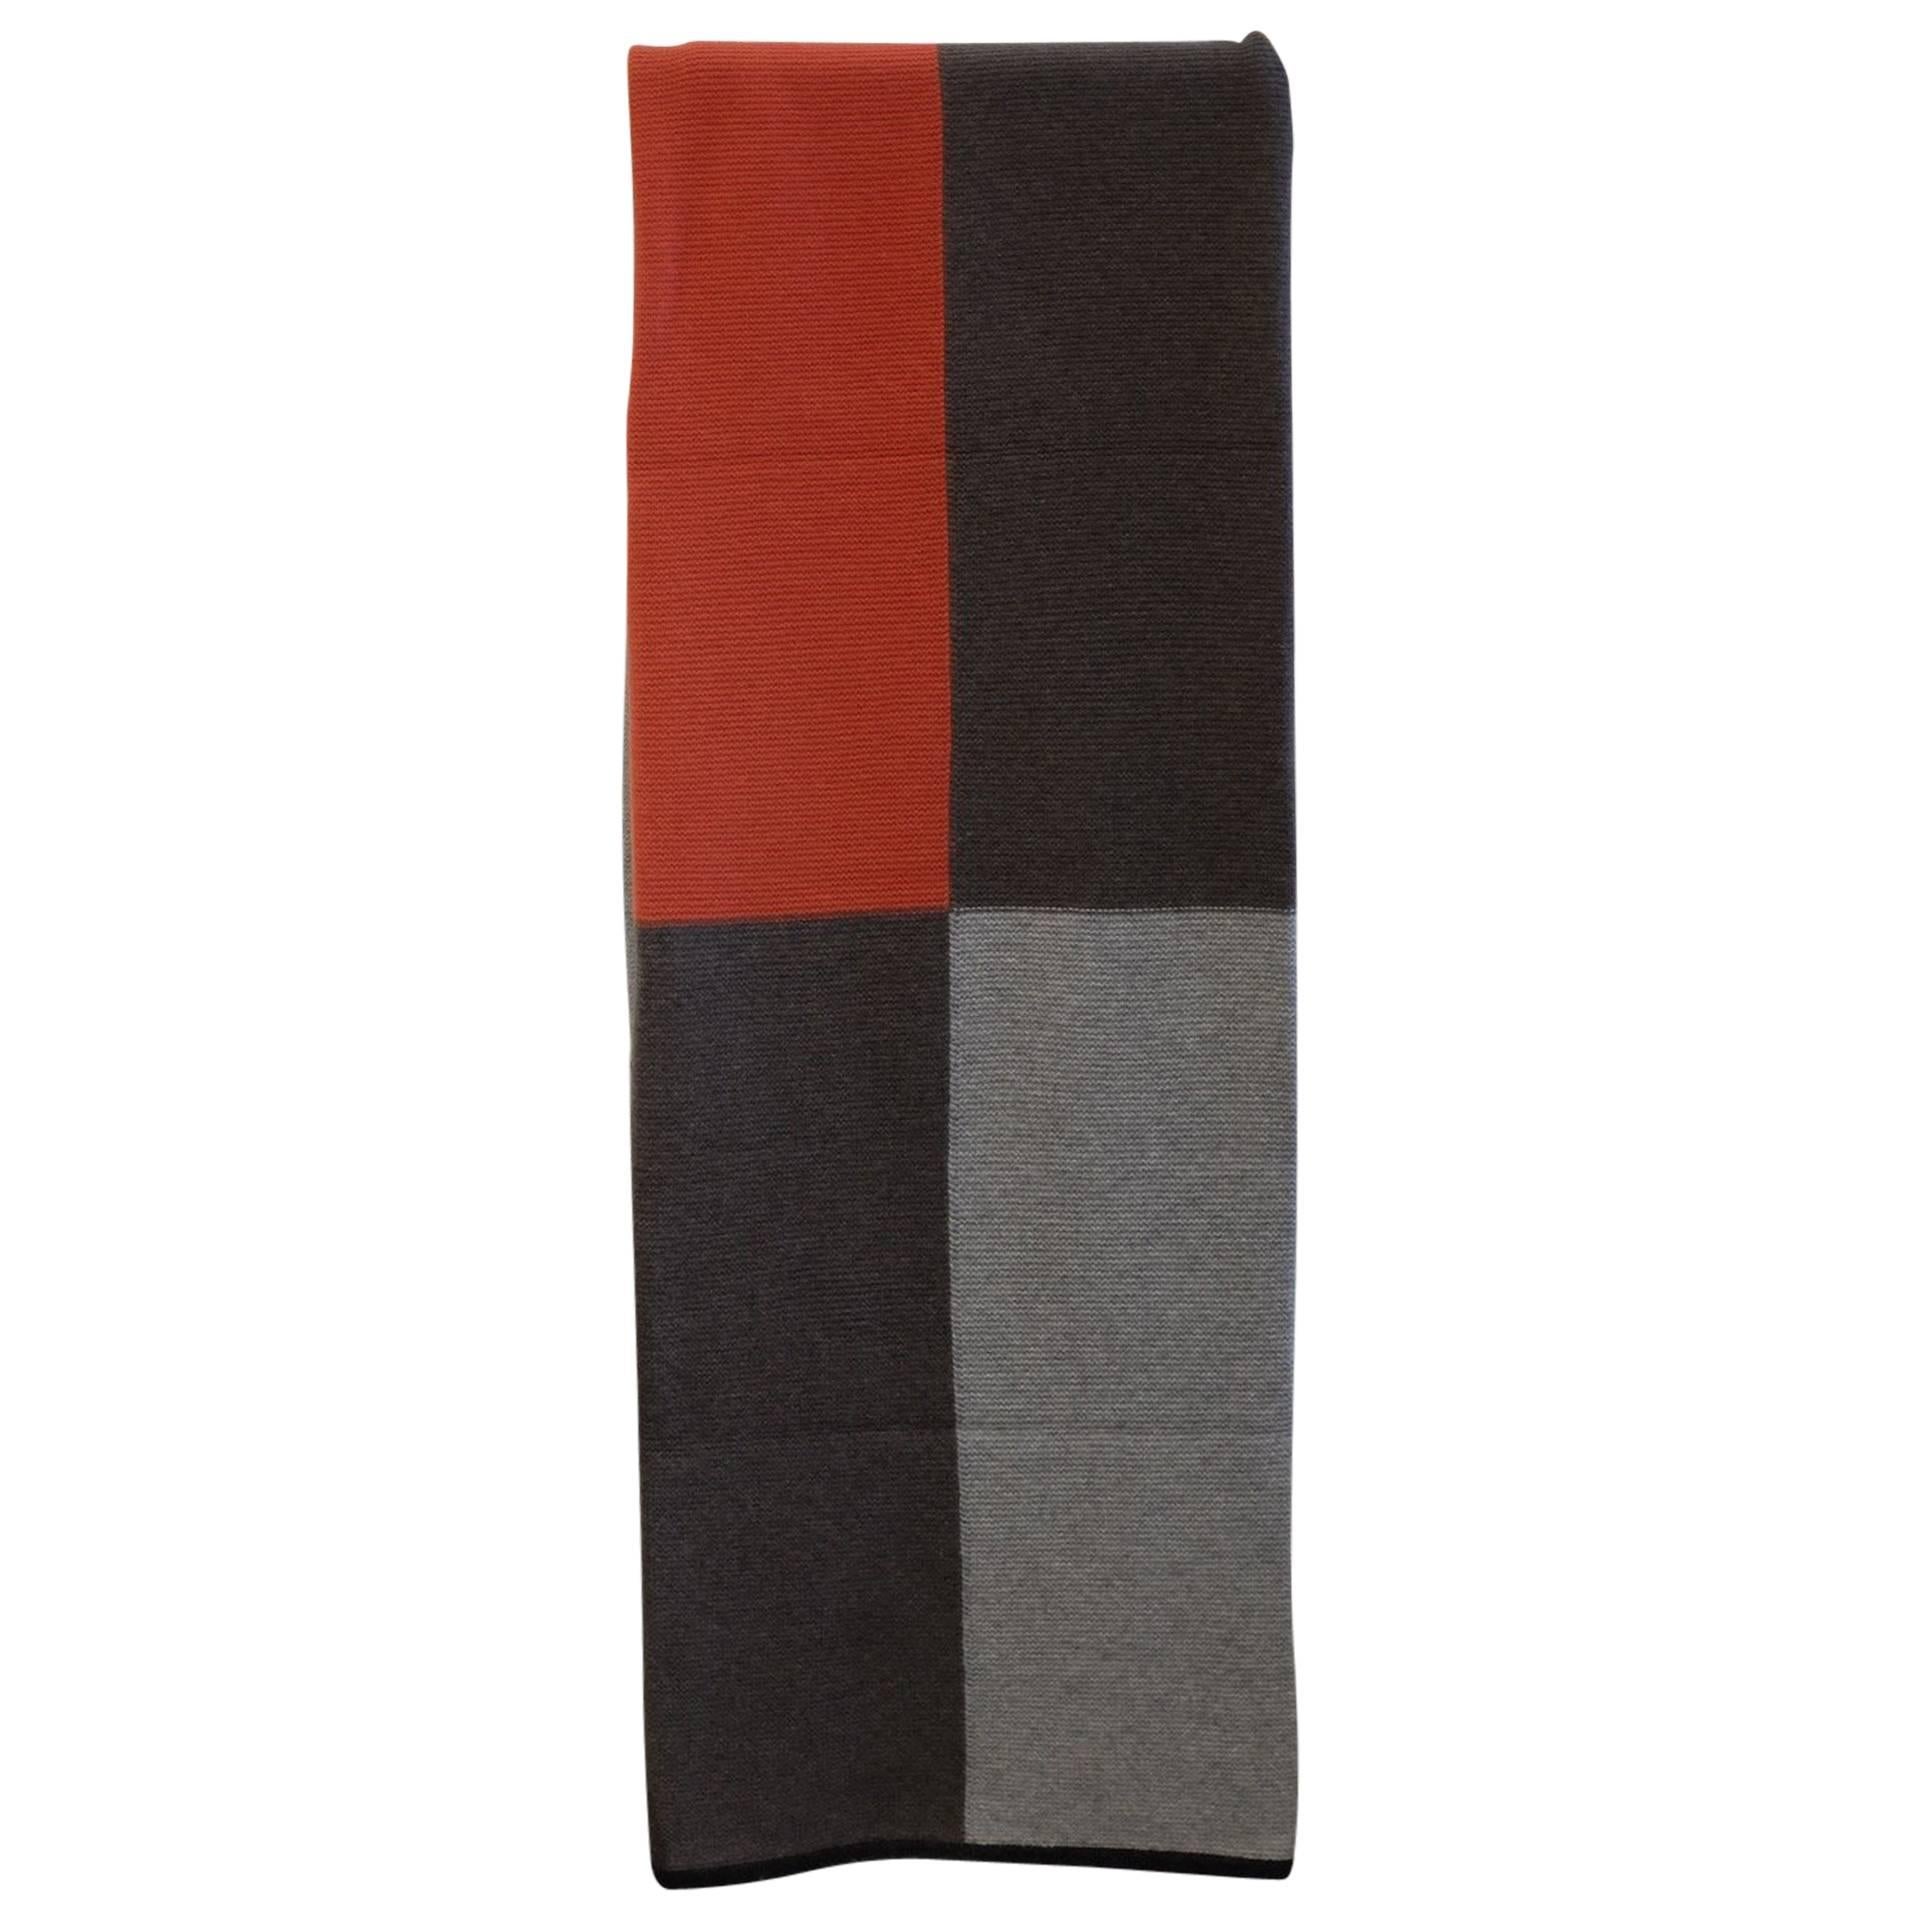 Hopscotch Purl Knit Grey and Rust Orange Cashmere Throw For Sale